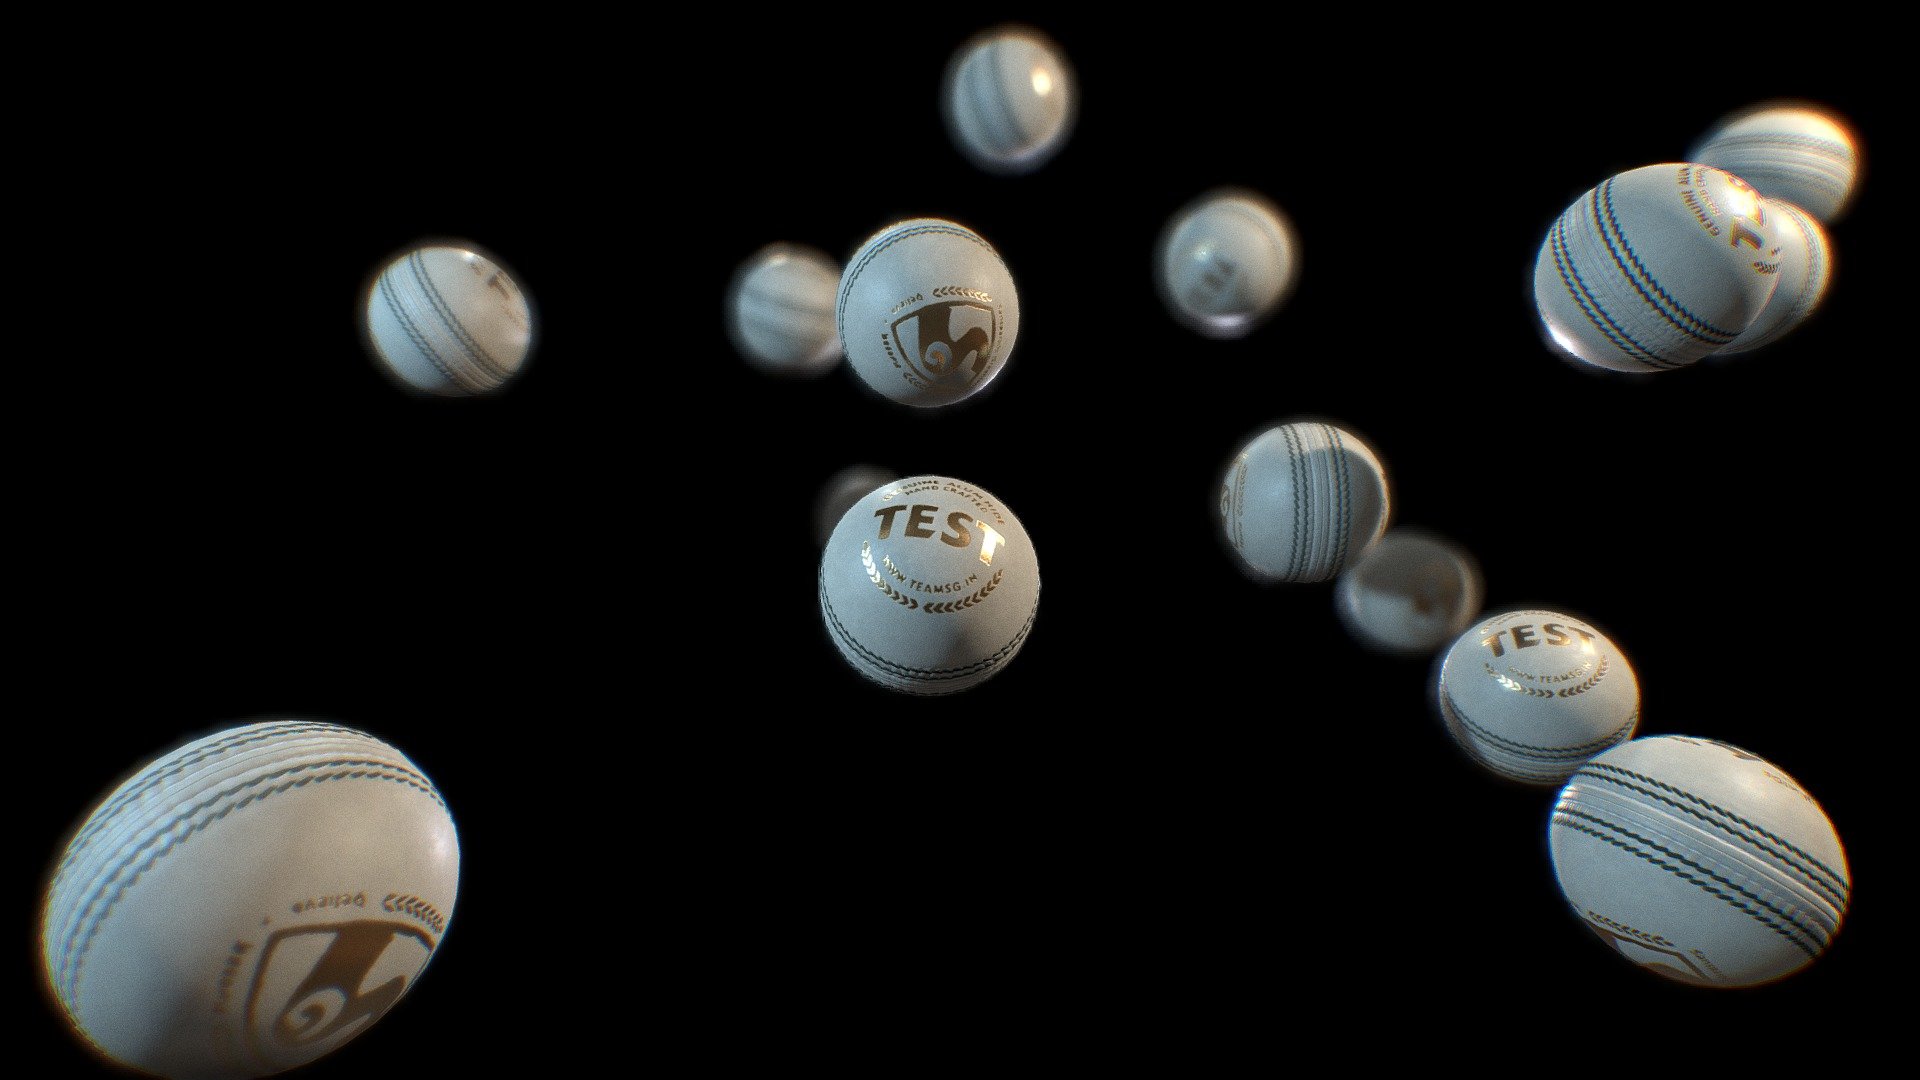 This are 3d models of cricket balls for using to play cricket. It is can be used as sport equipment asset for games and many other render scenes.

This model is created in 3ds Max and textured in Substance Painter.

This model is made in real proportions.

High quality of textures are available to download.

Maps include - Base Color, Normal, AO, Metallic and Roughness Textures 3d model